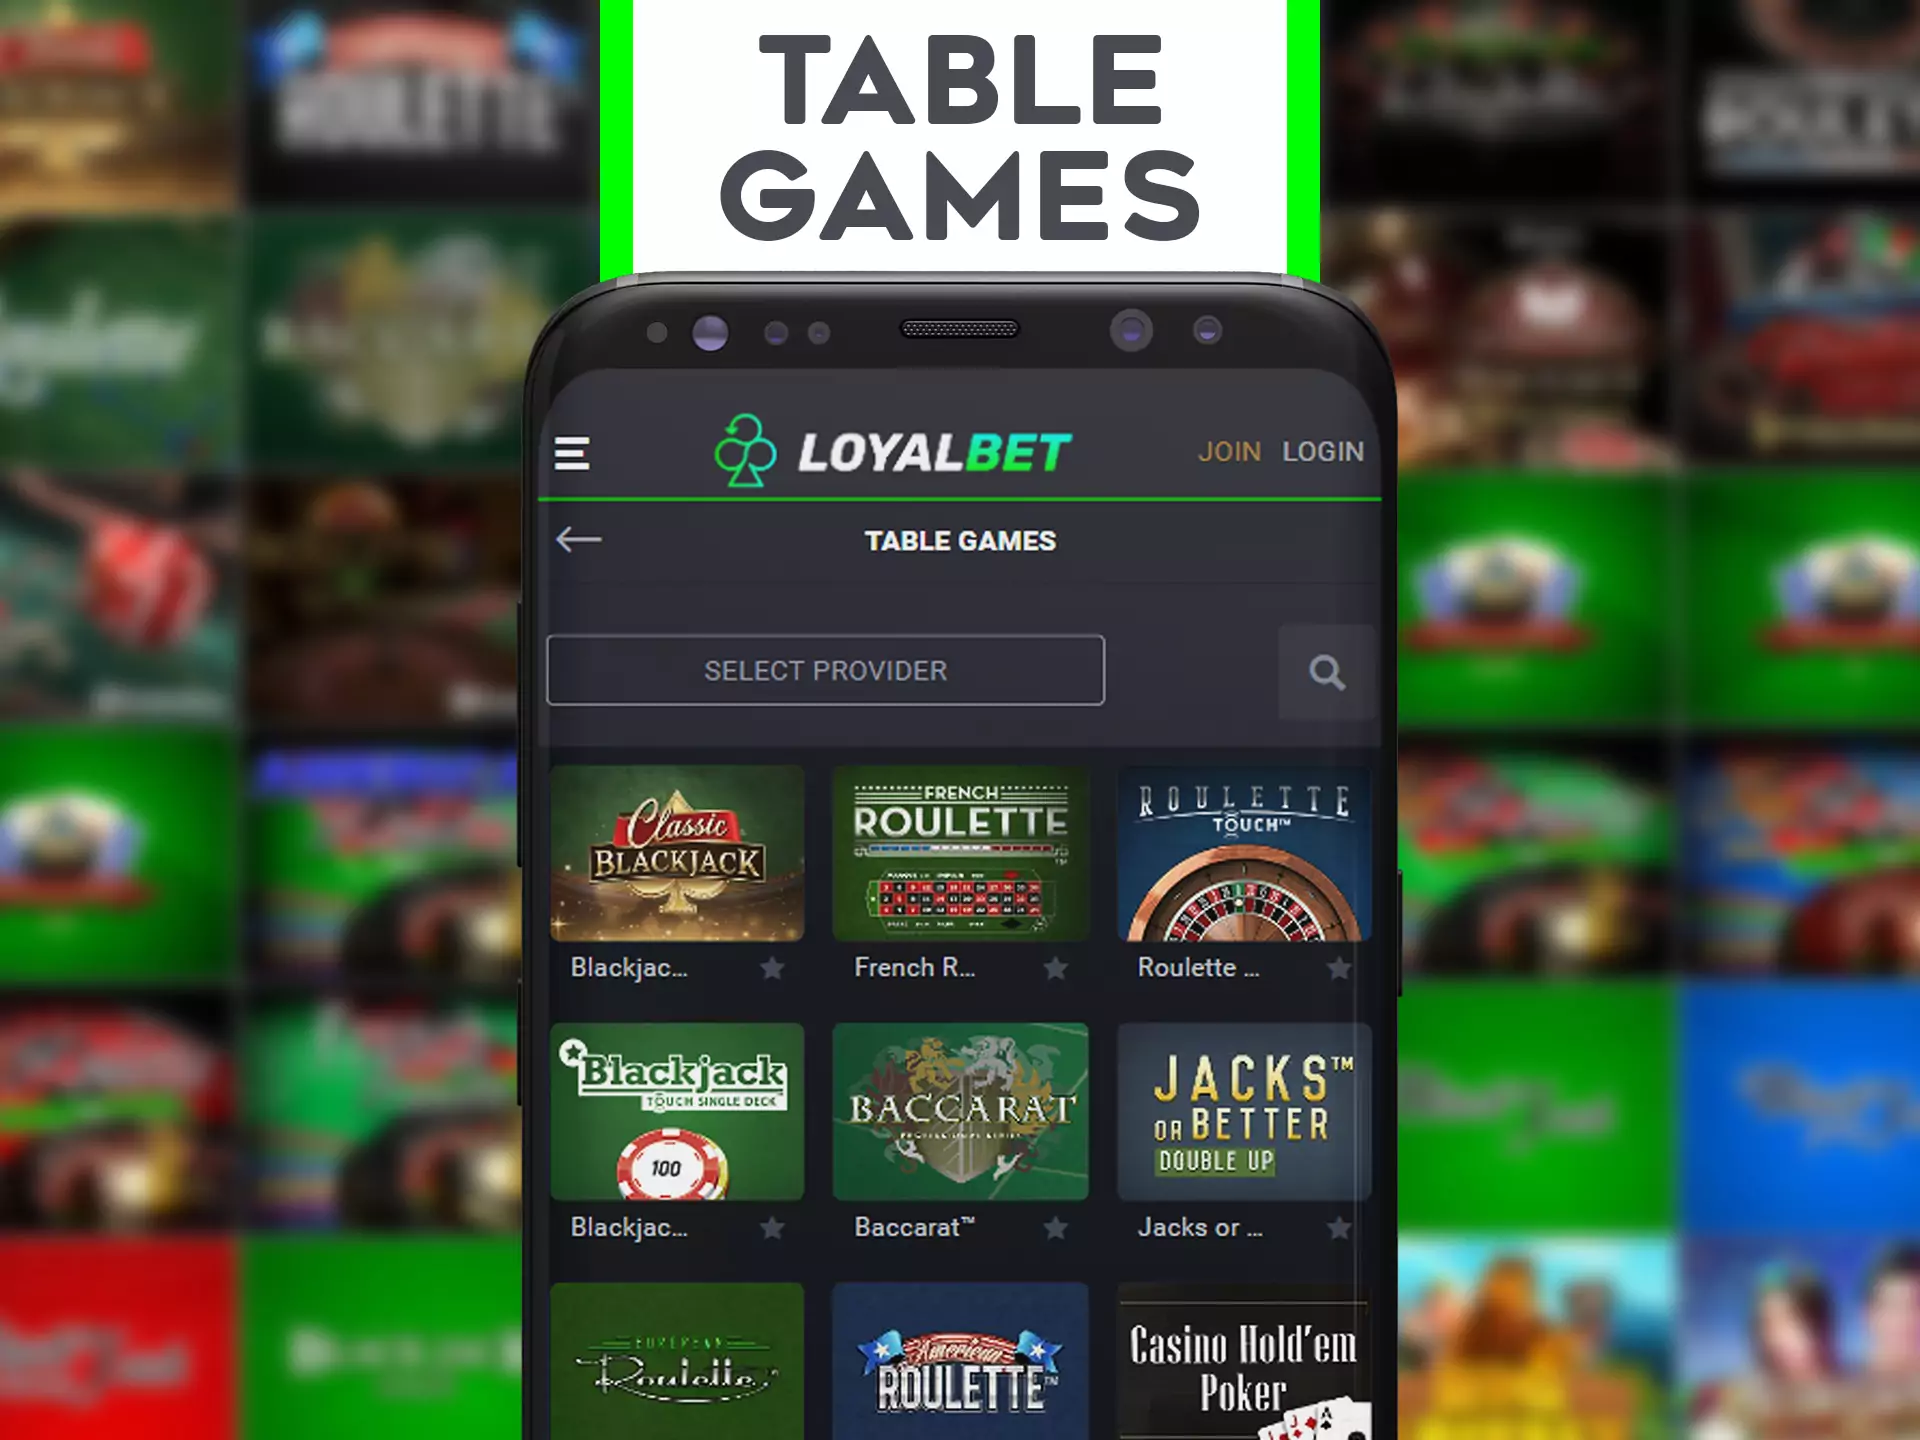 Search for most enjoyable table game at Loyalbet.